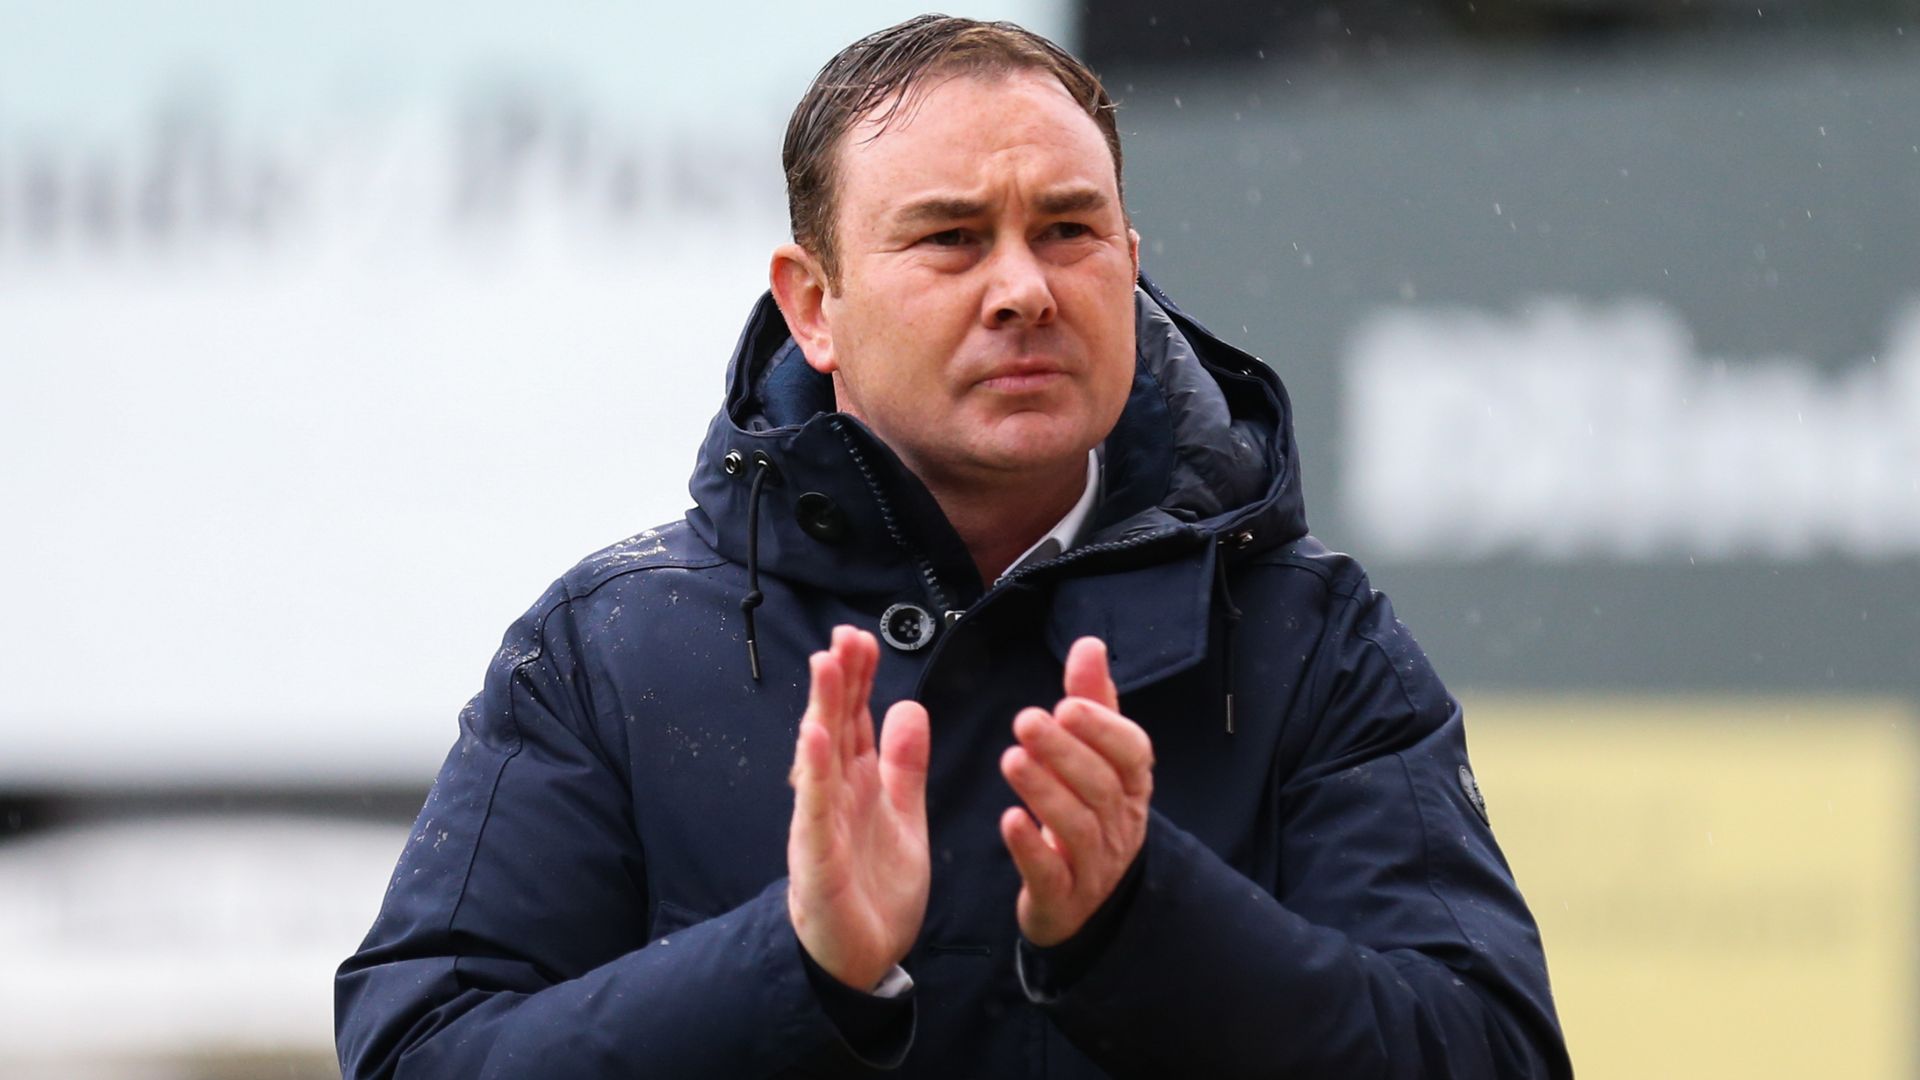 'I'm not surprised!' - Adams resigns from Ross County